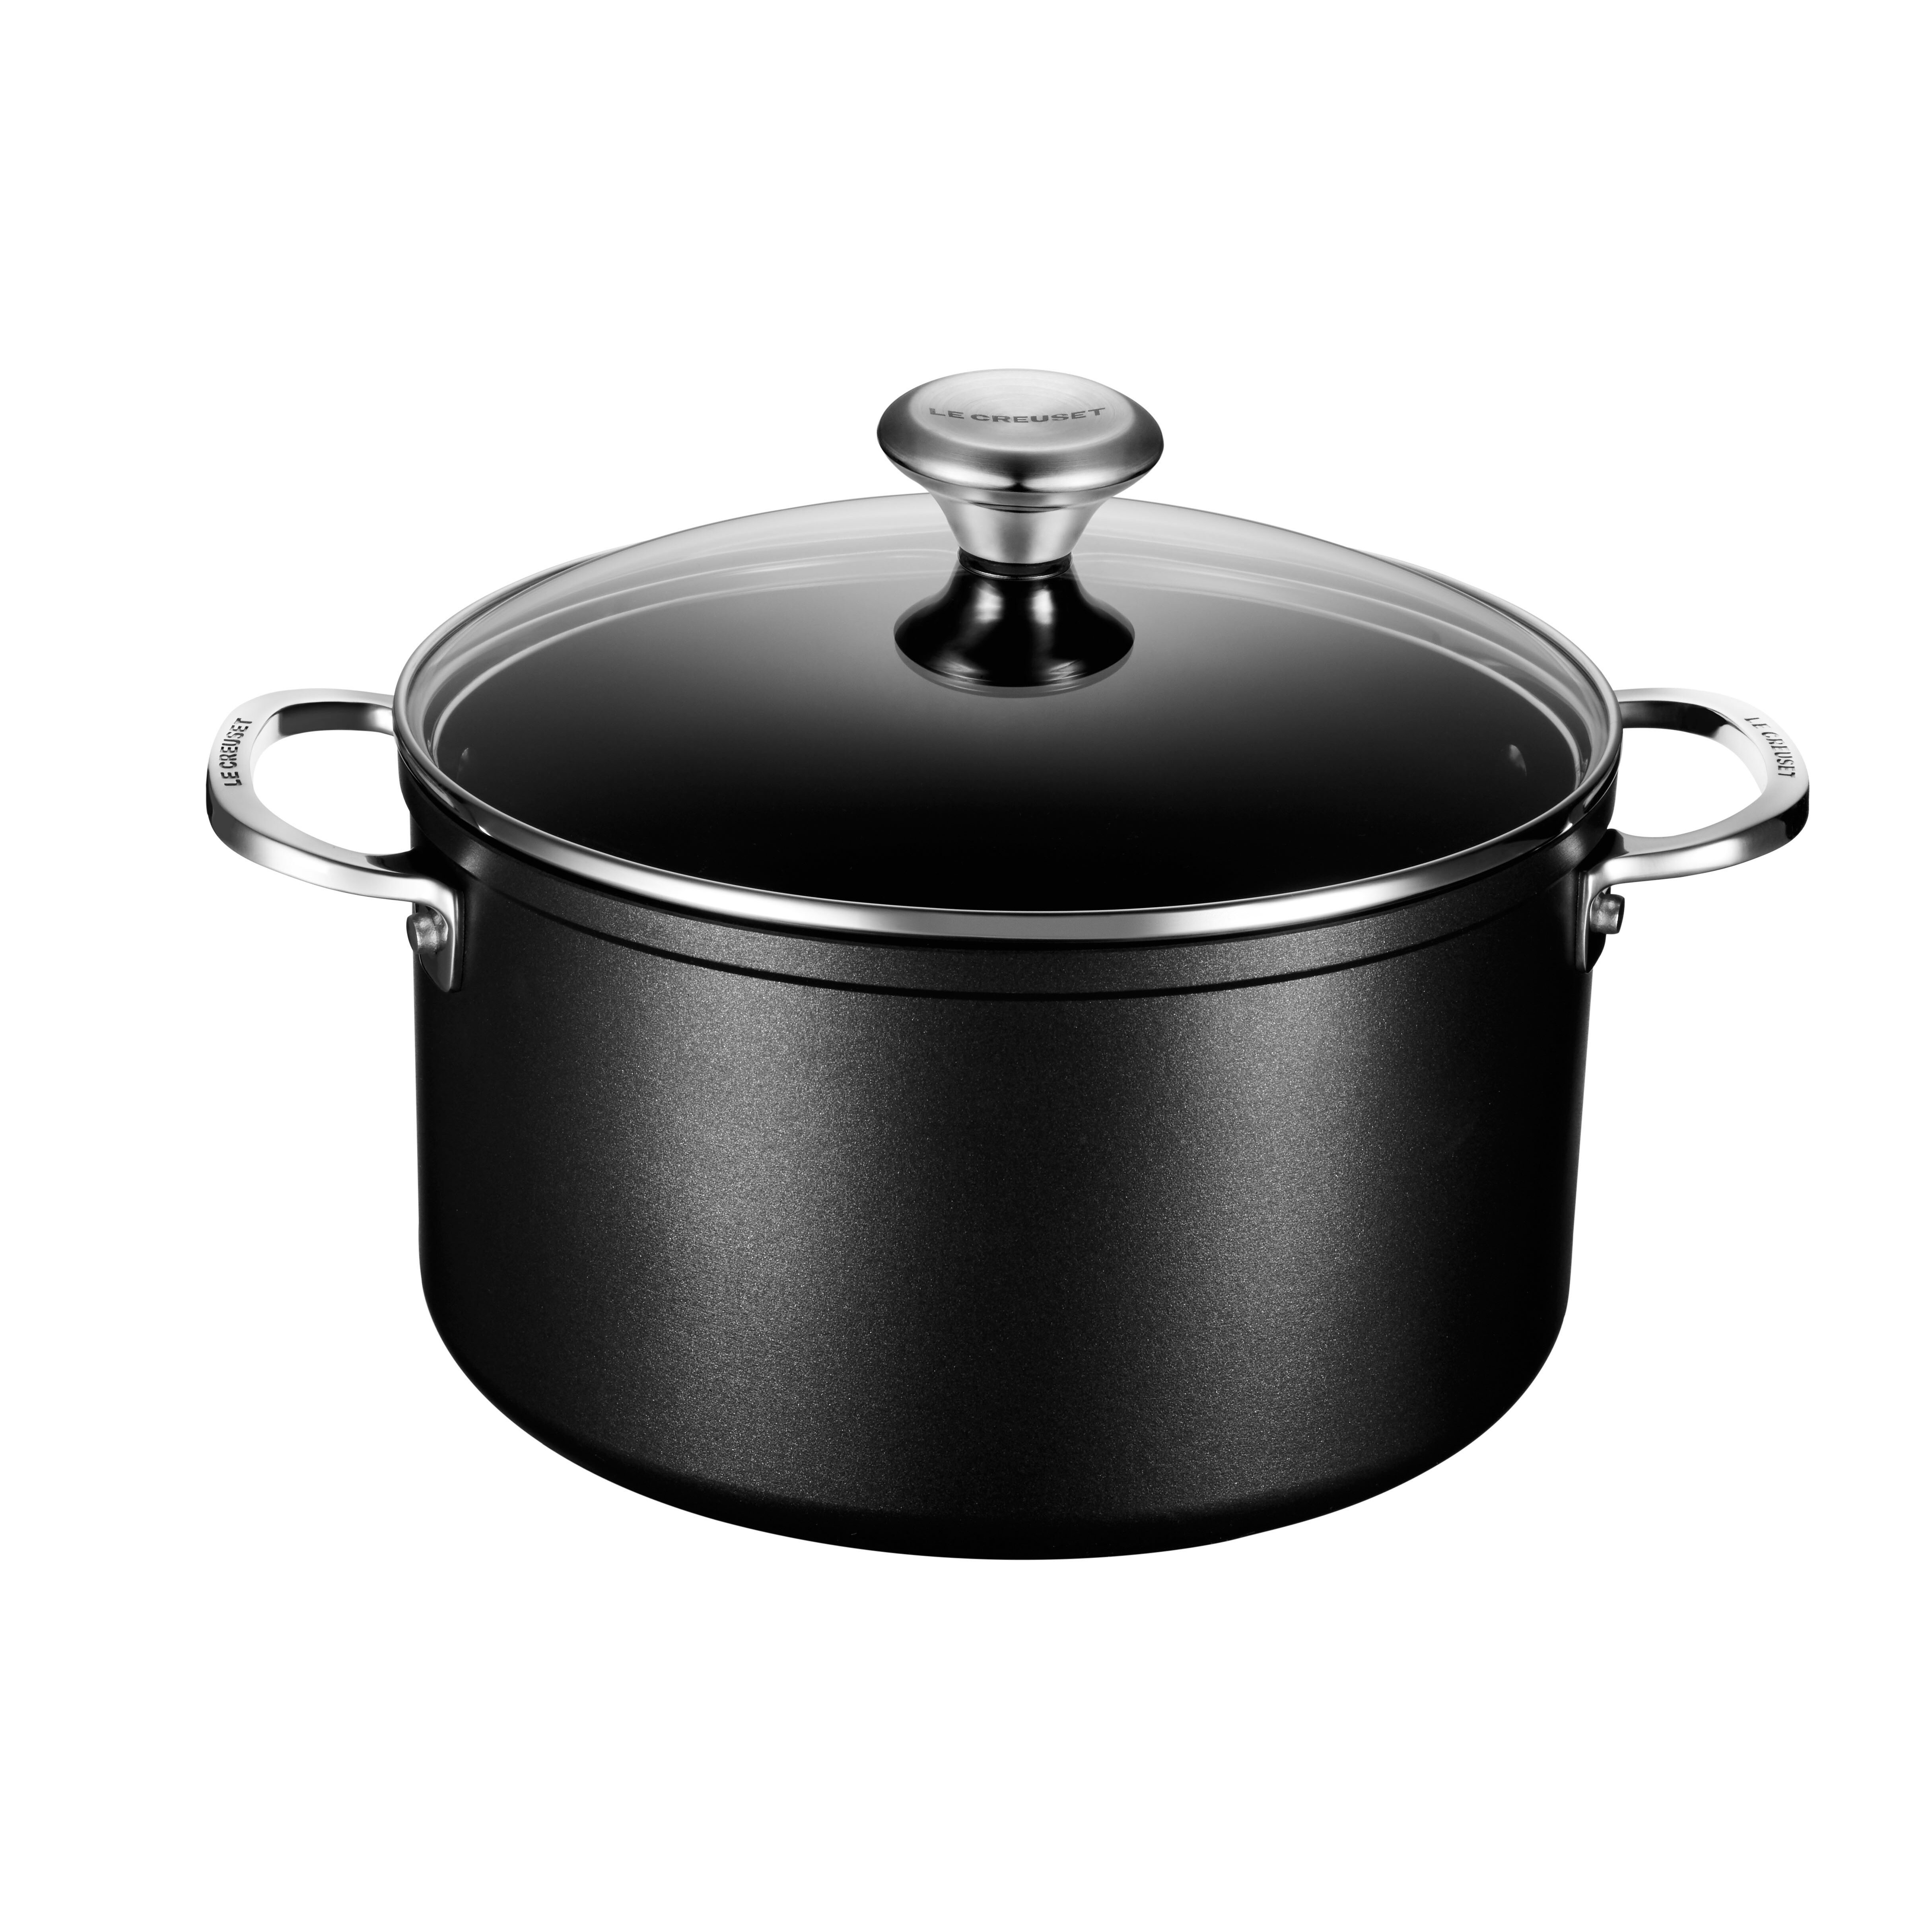 Le Creuset Stockpot with Lid & Reviews